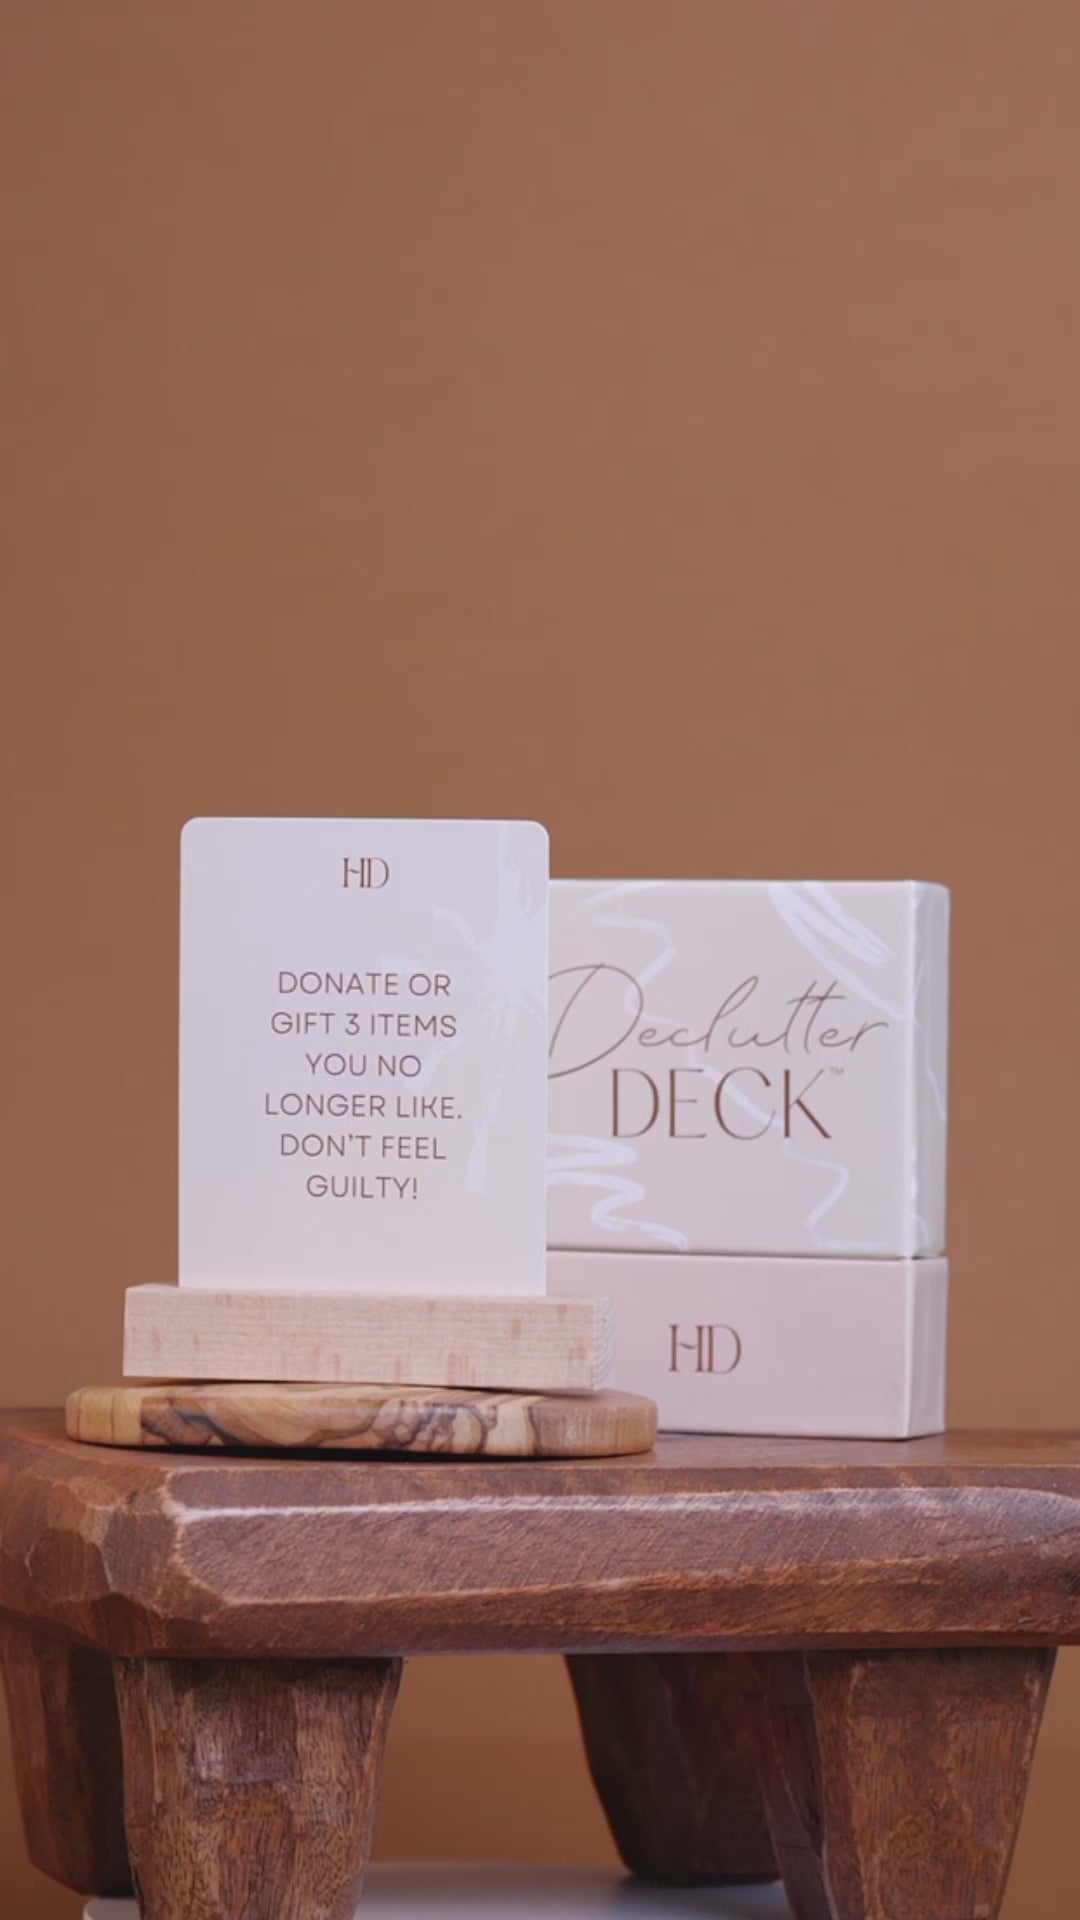 rotating image of Declutter Deck®